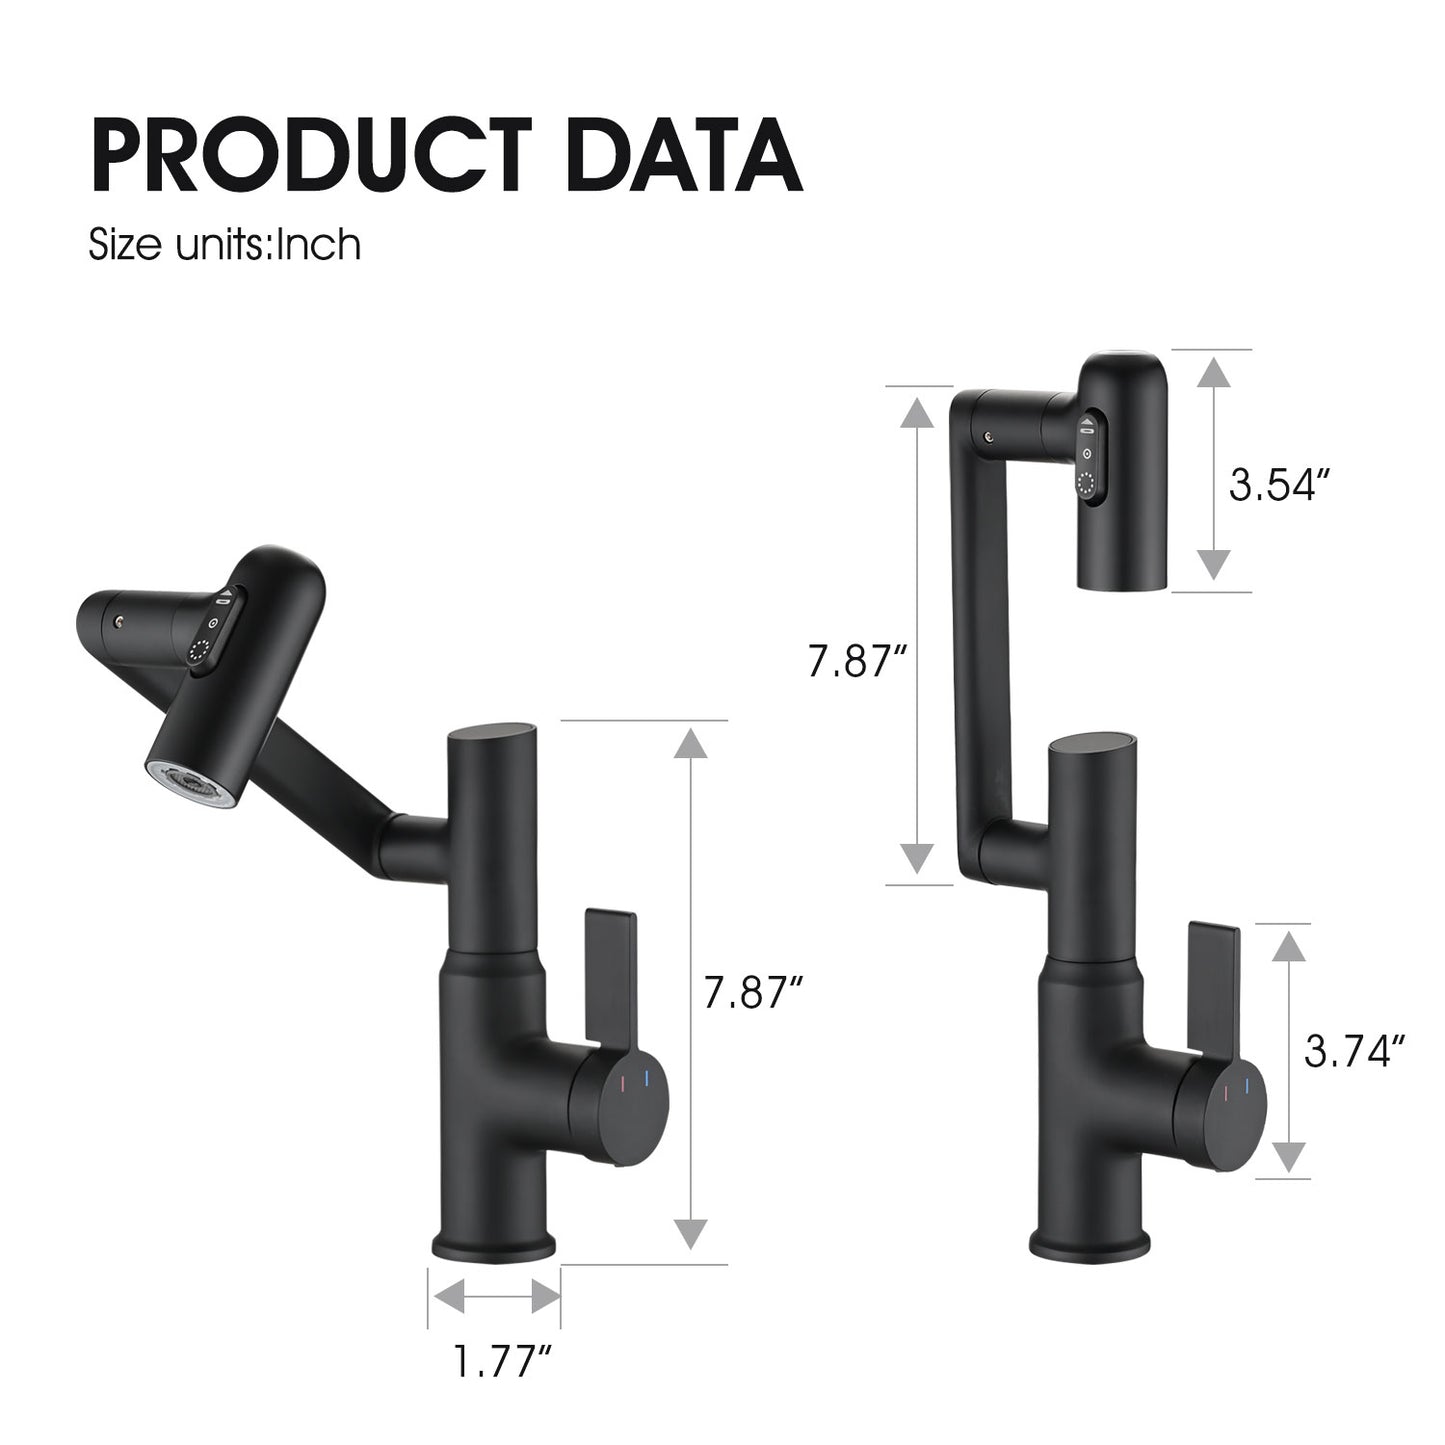 Matte Black Bathroom Sink Faucet With Temperature Display And Spray Function